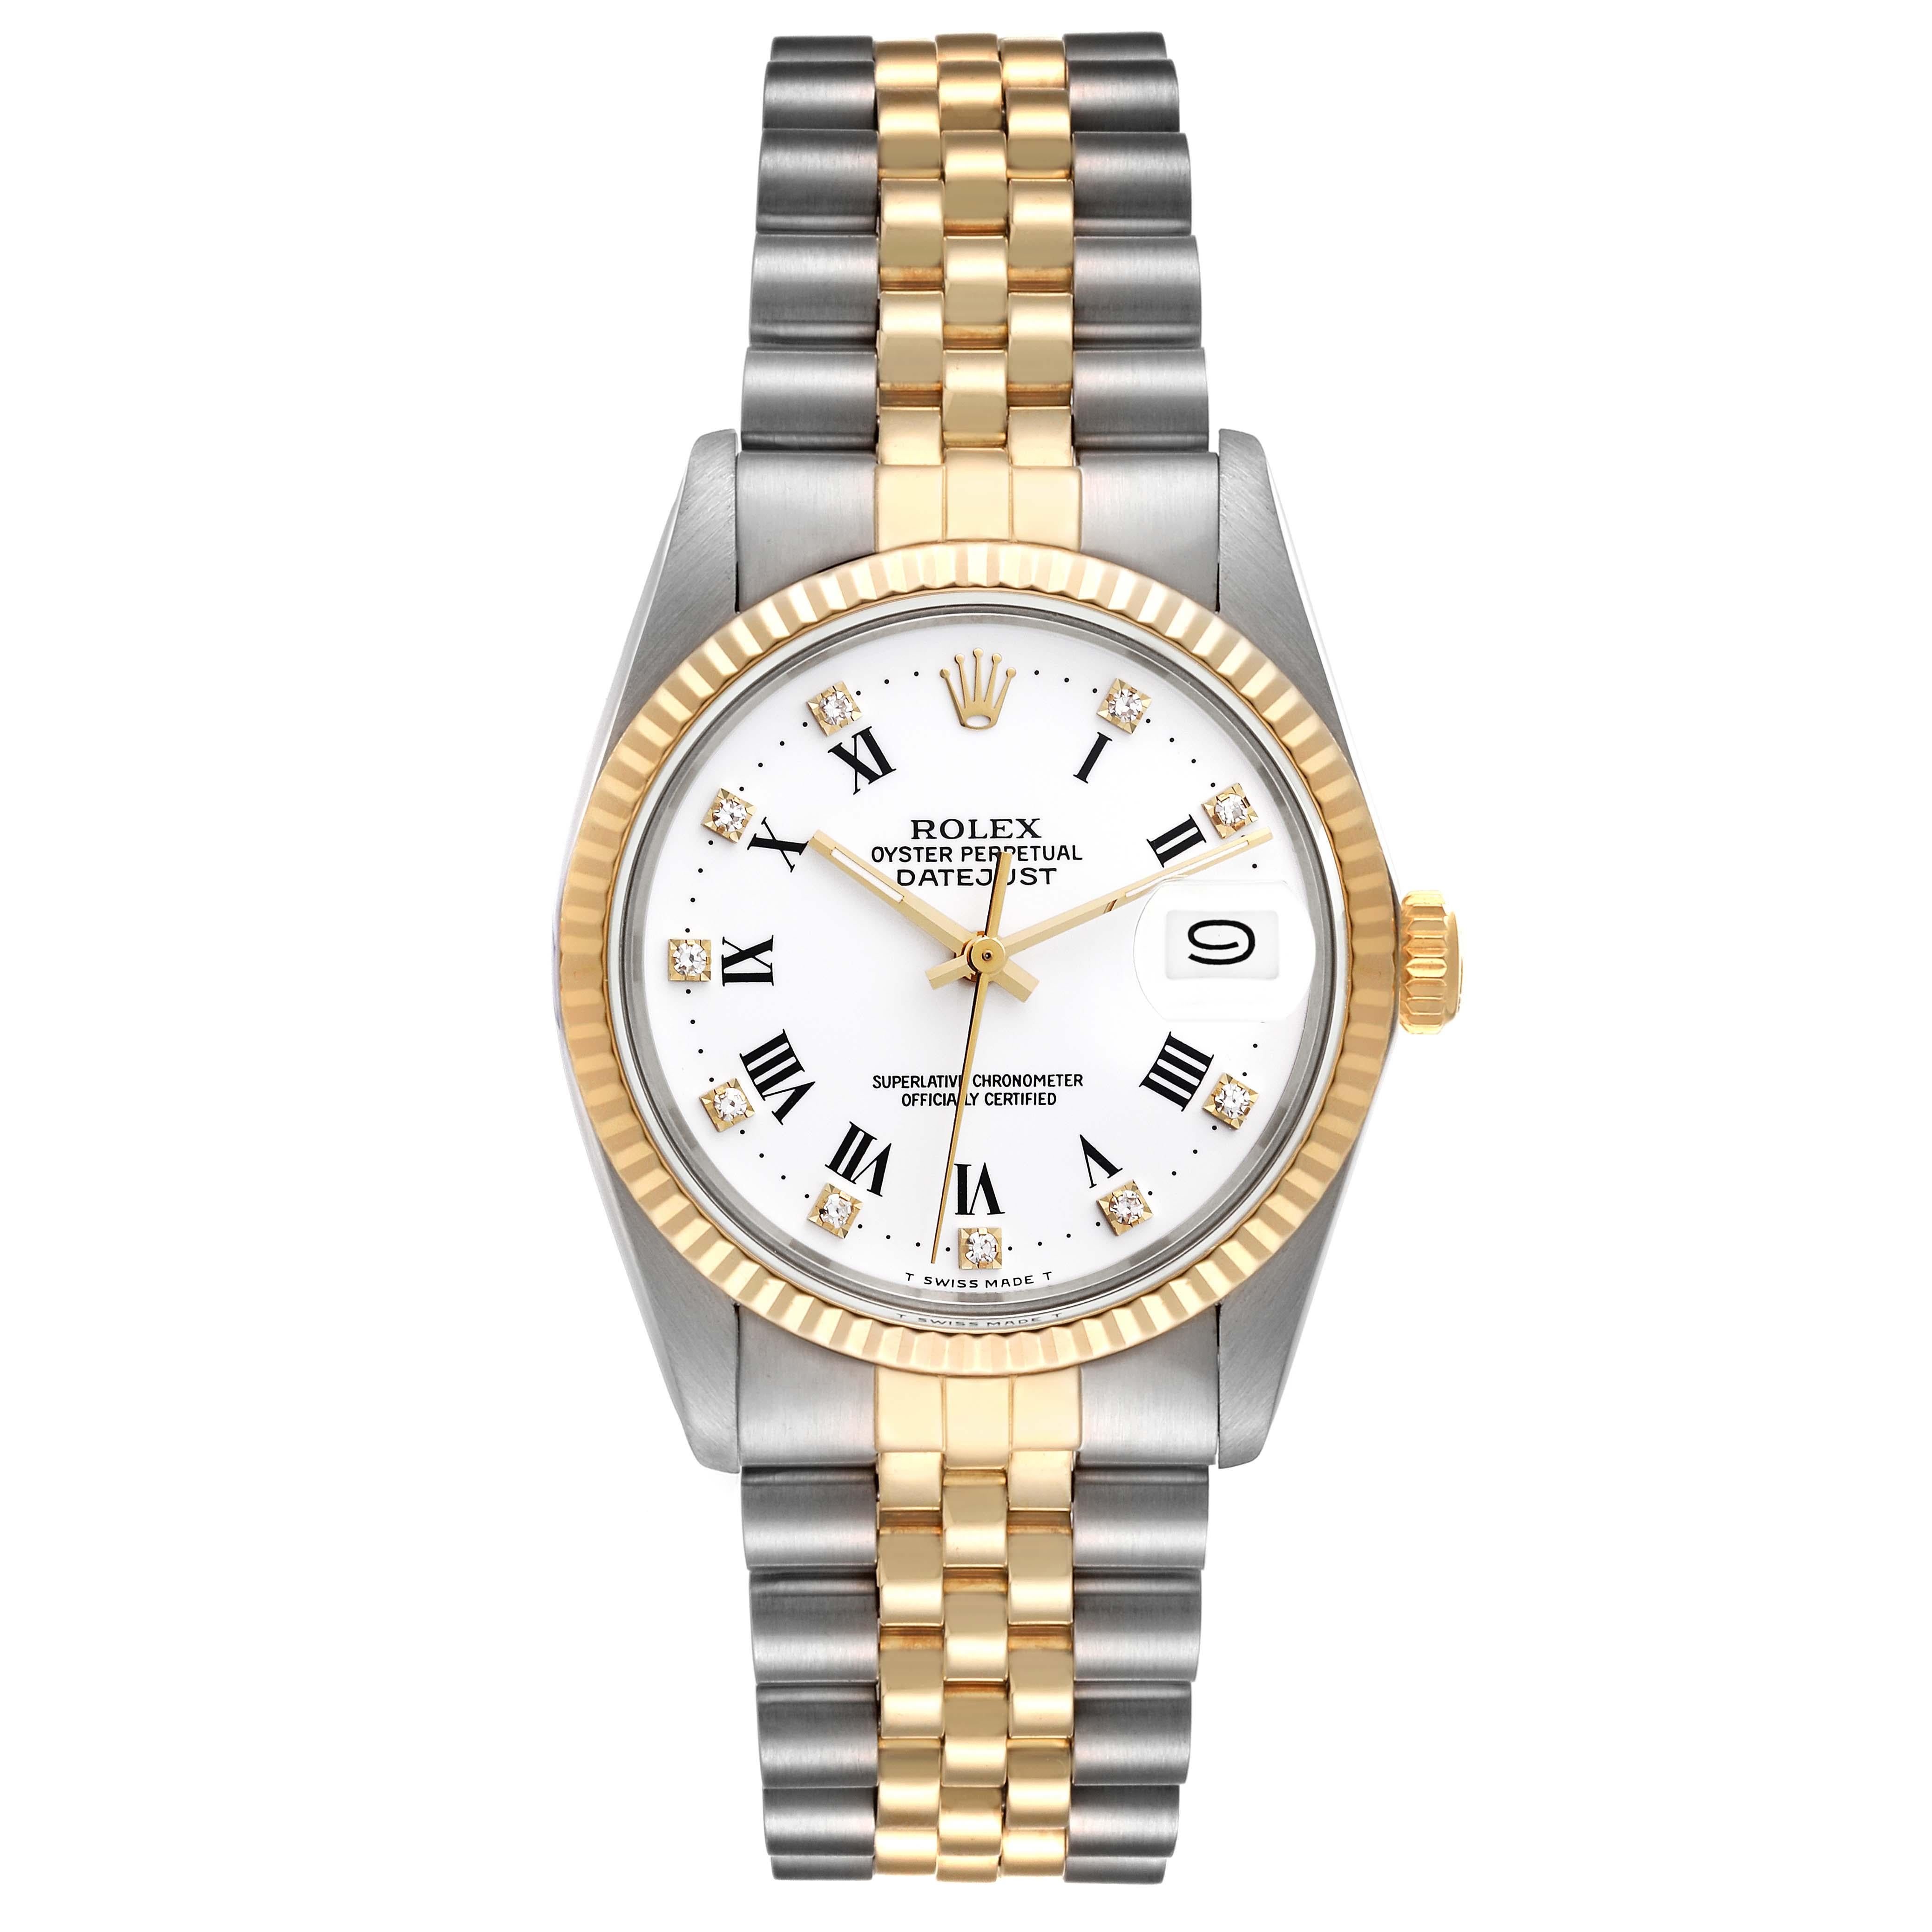 Rolex Datejust Steel Yellow Gold White Diamond Dial Vintage Mens Watch 16013. Officially certified chronometer automatic self-winding movement. Stainless steel oyster case 36.0 mm in diameter. Rolex logo on a crown. 18k yellow gold fluted bezel.